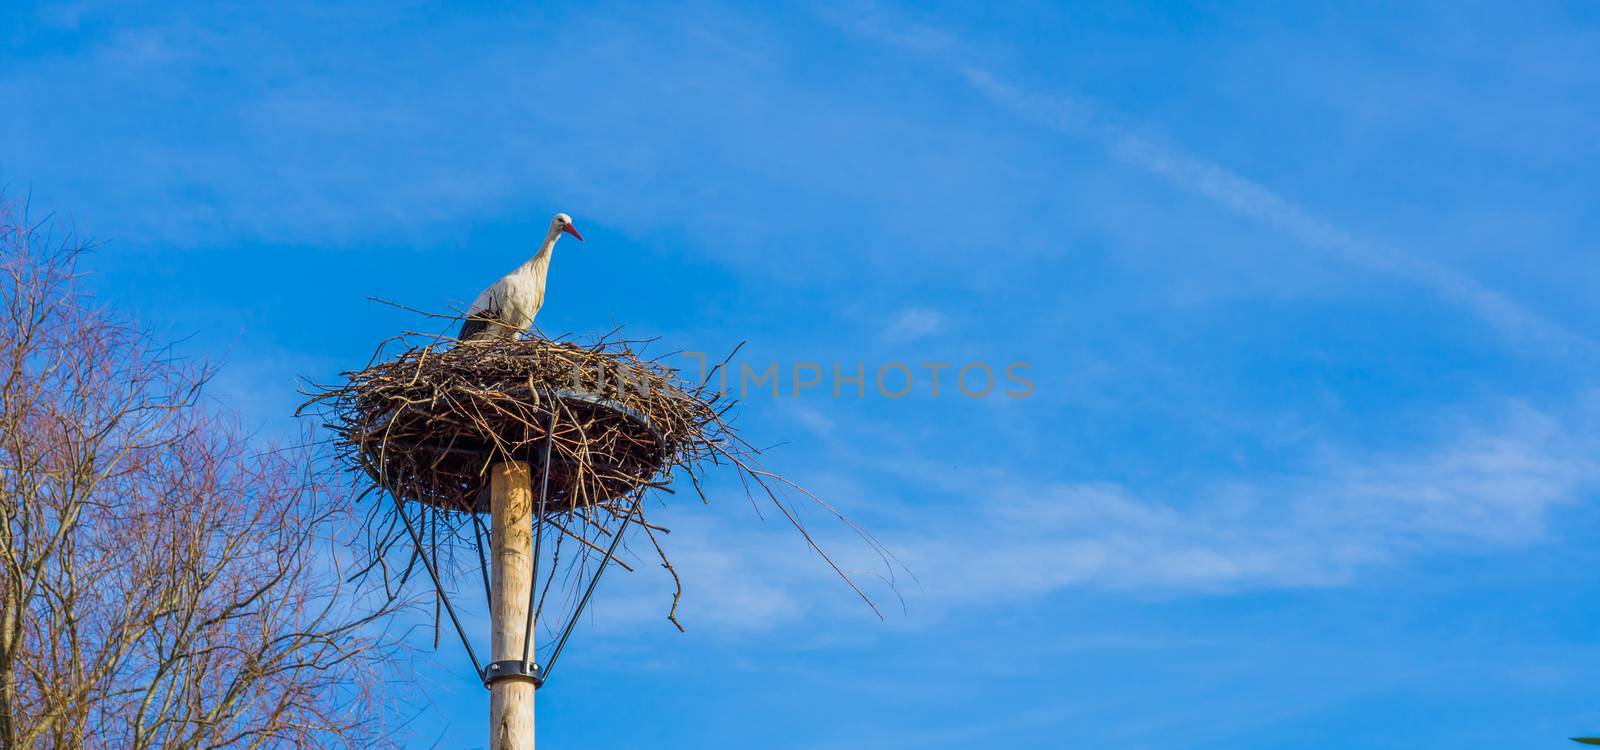 big birds nest with a stork in it, clean and deep blue sky in the background, migrated bird from Africa by charlottebleijenberg